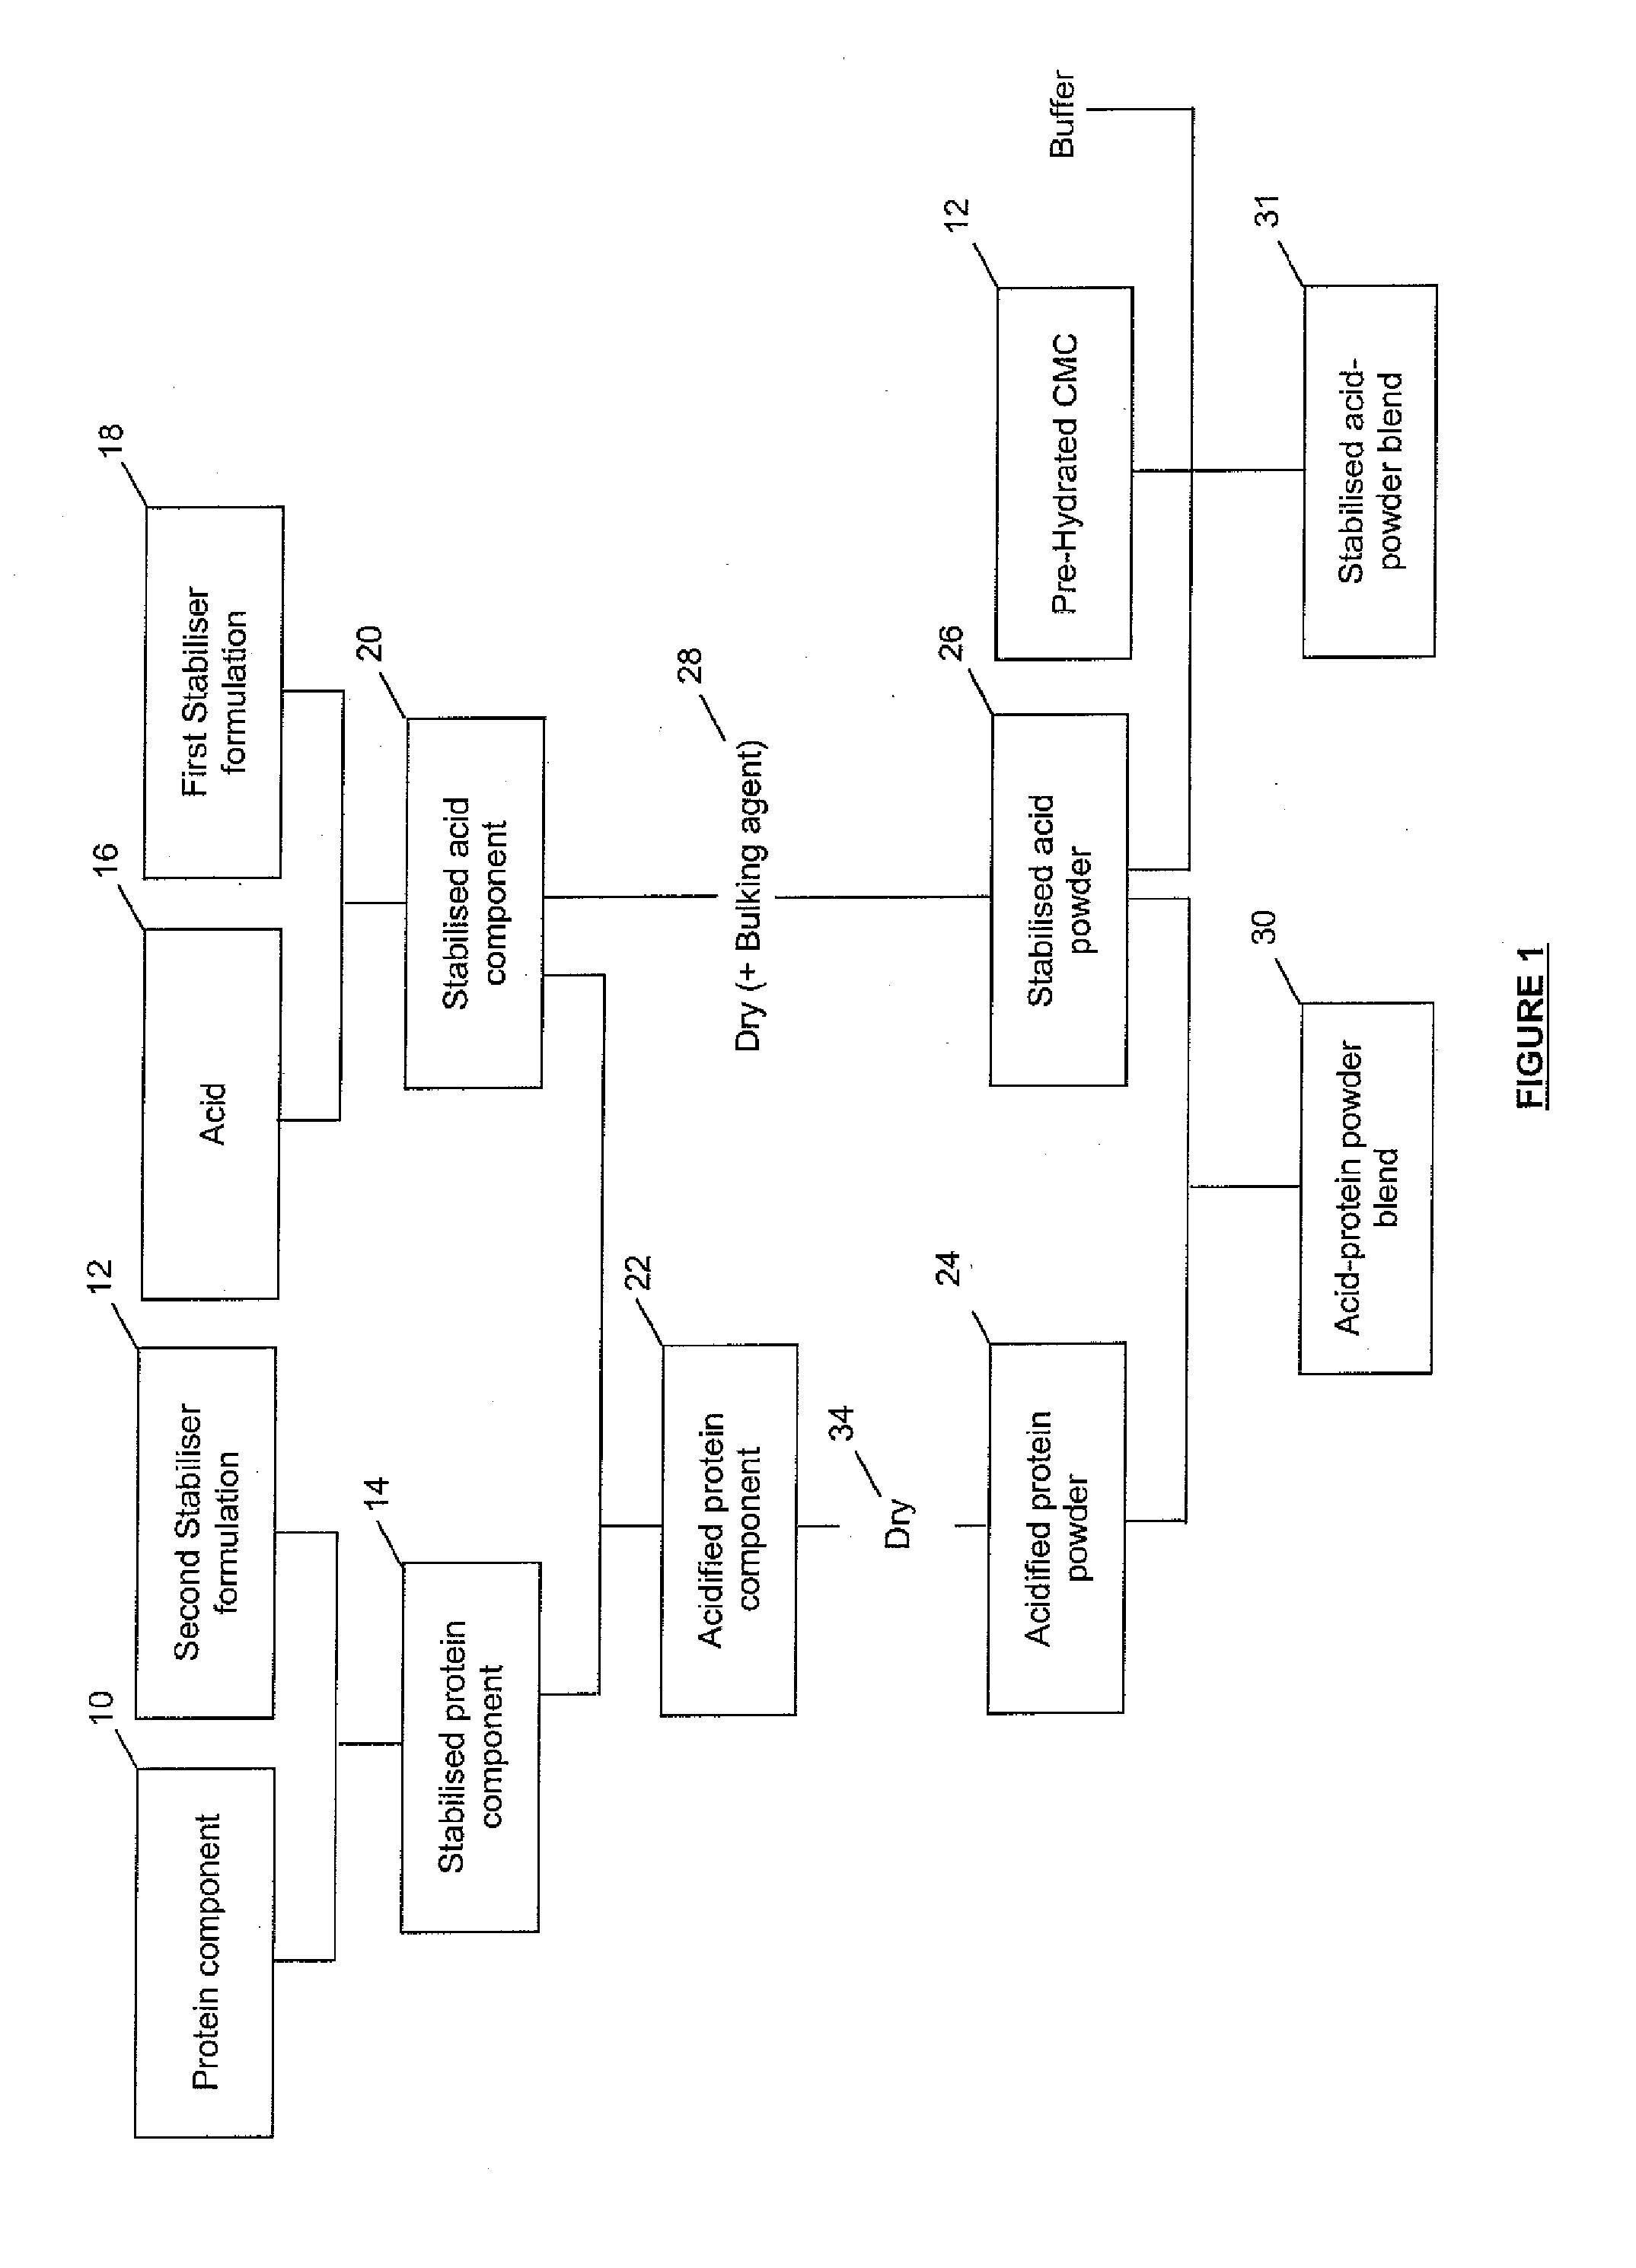 Method of Producing Acid Stable Protein Products and Products so Produced